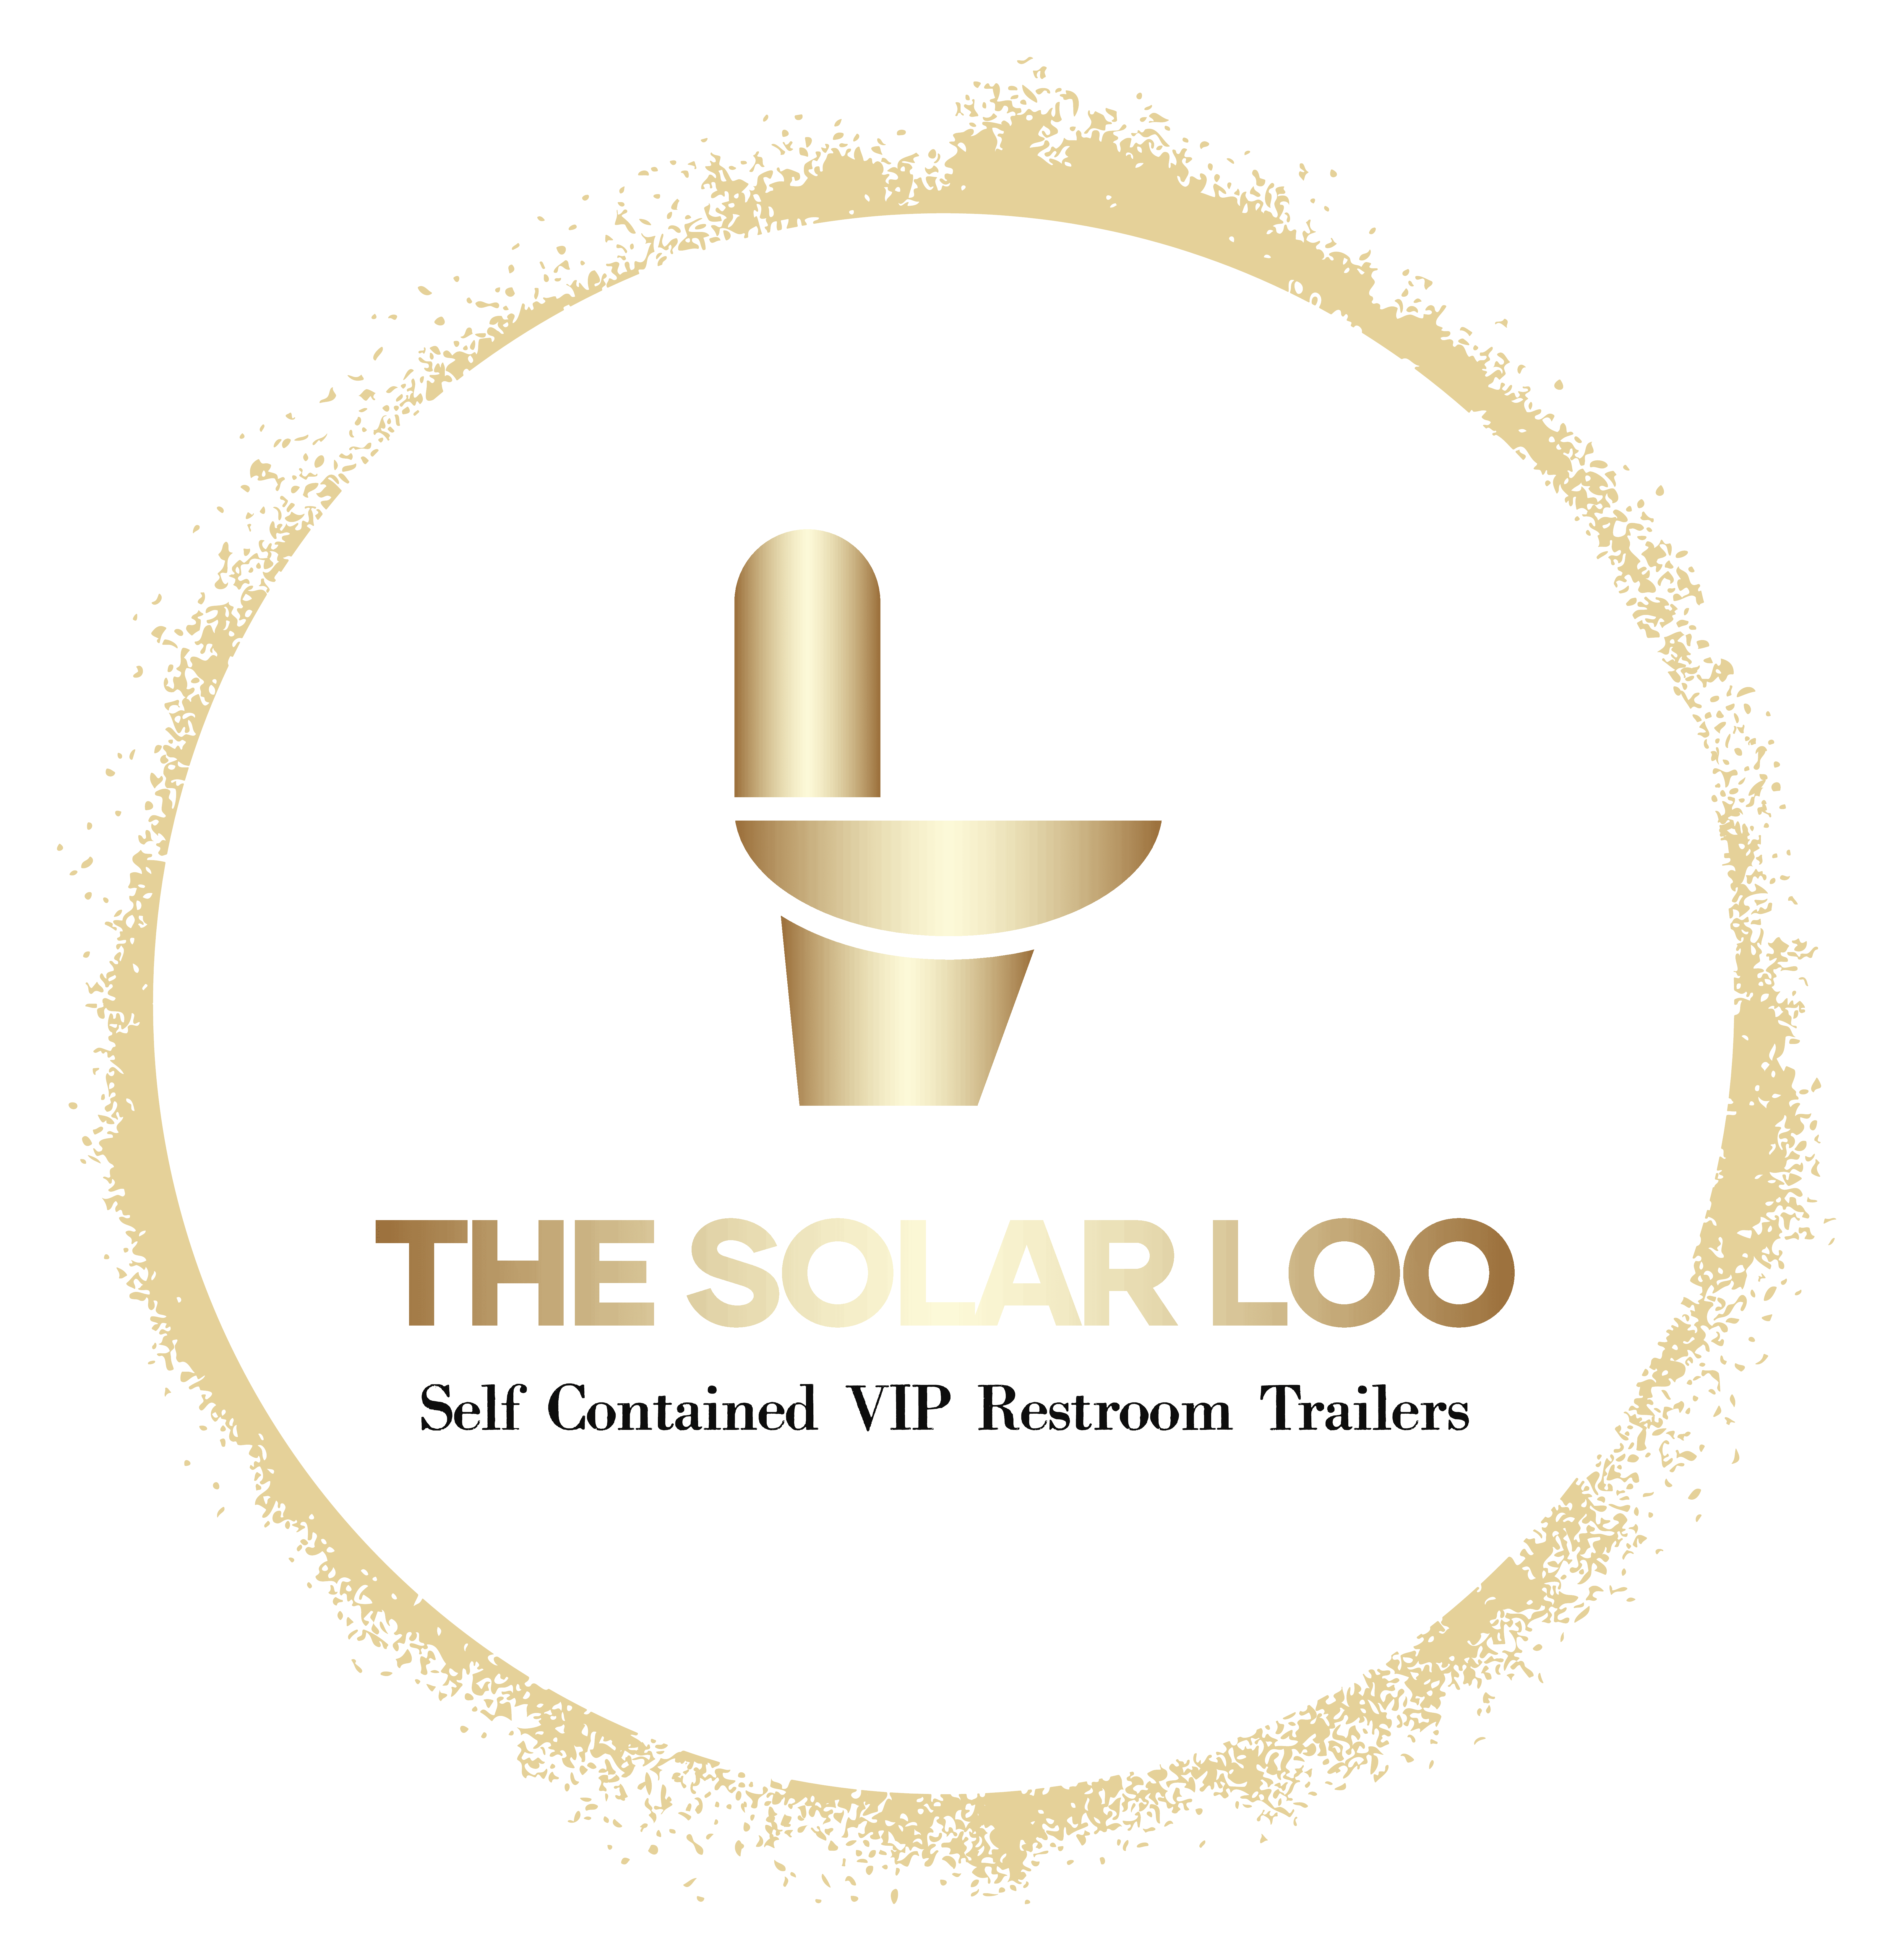 Portable Restroom Trailers for sale- The Solar loo